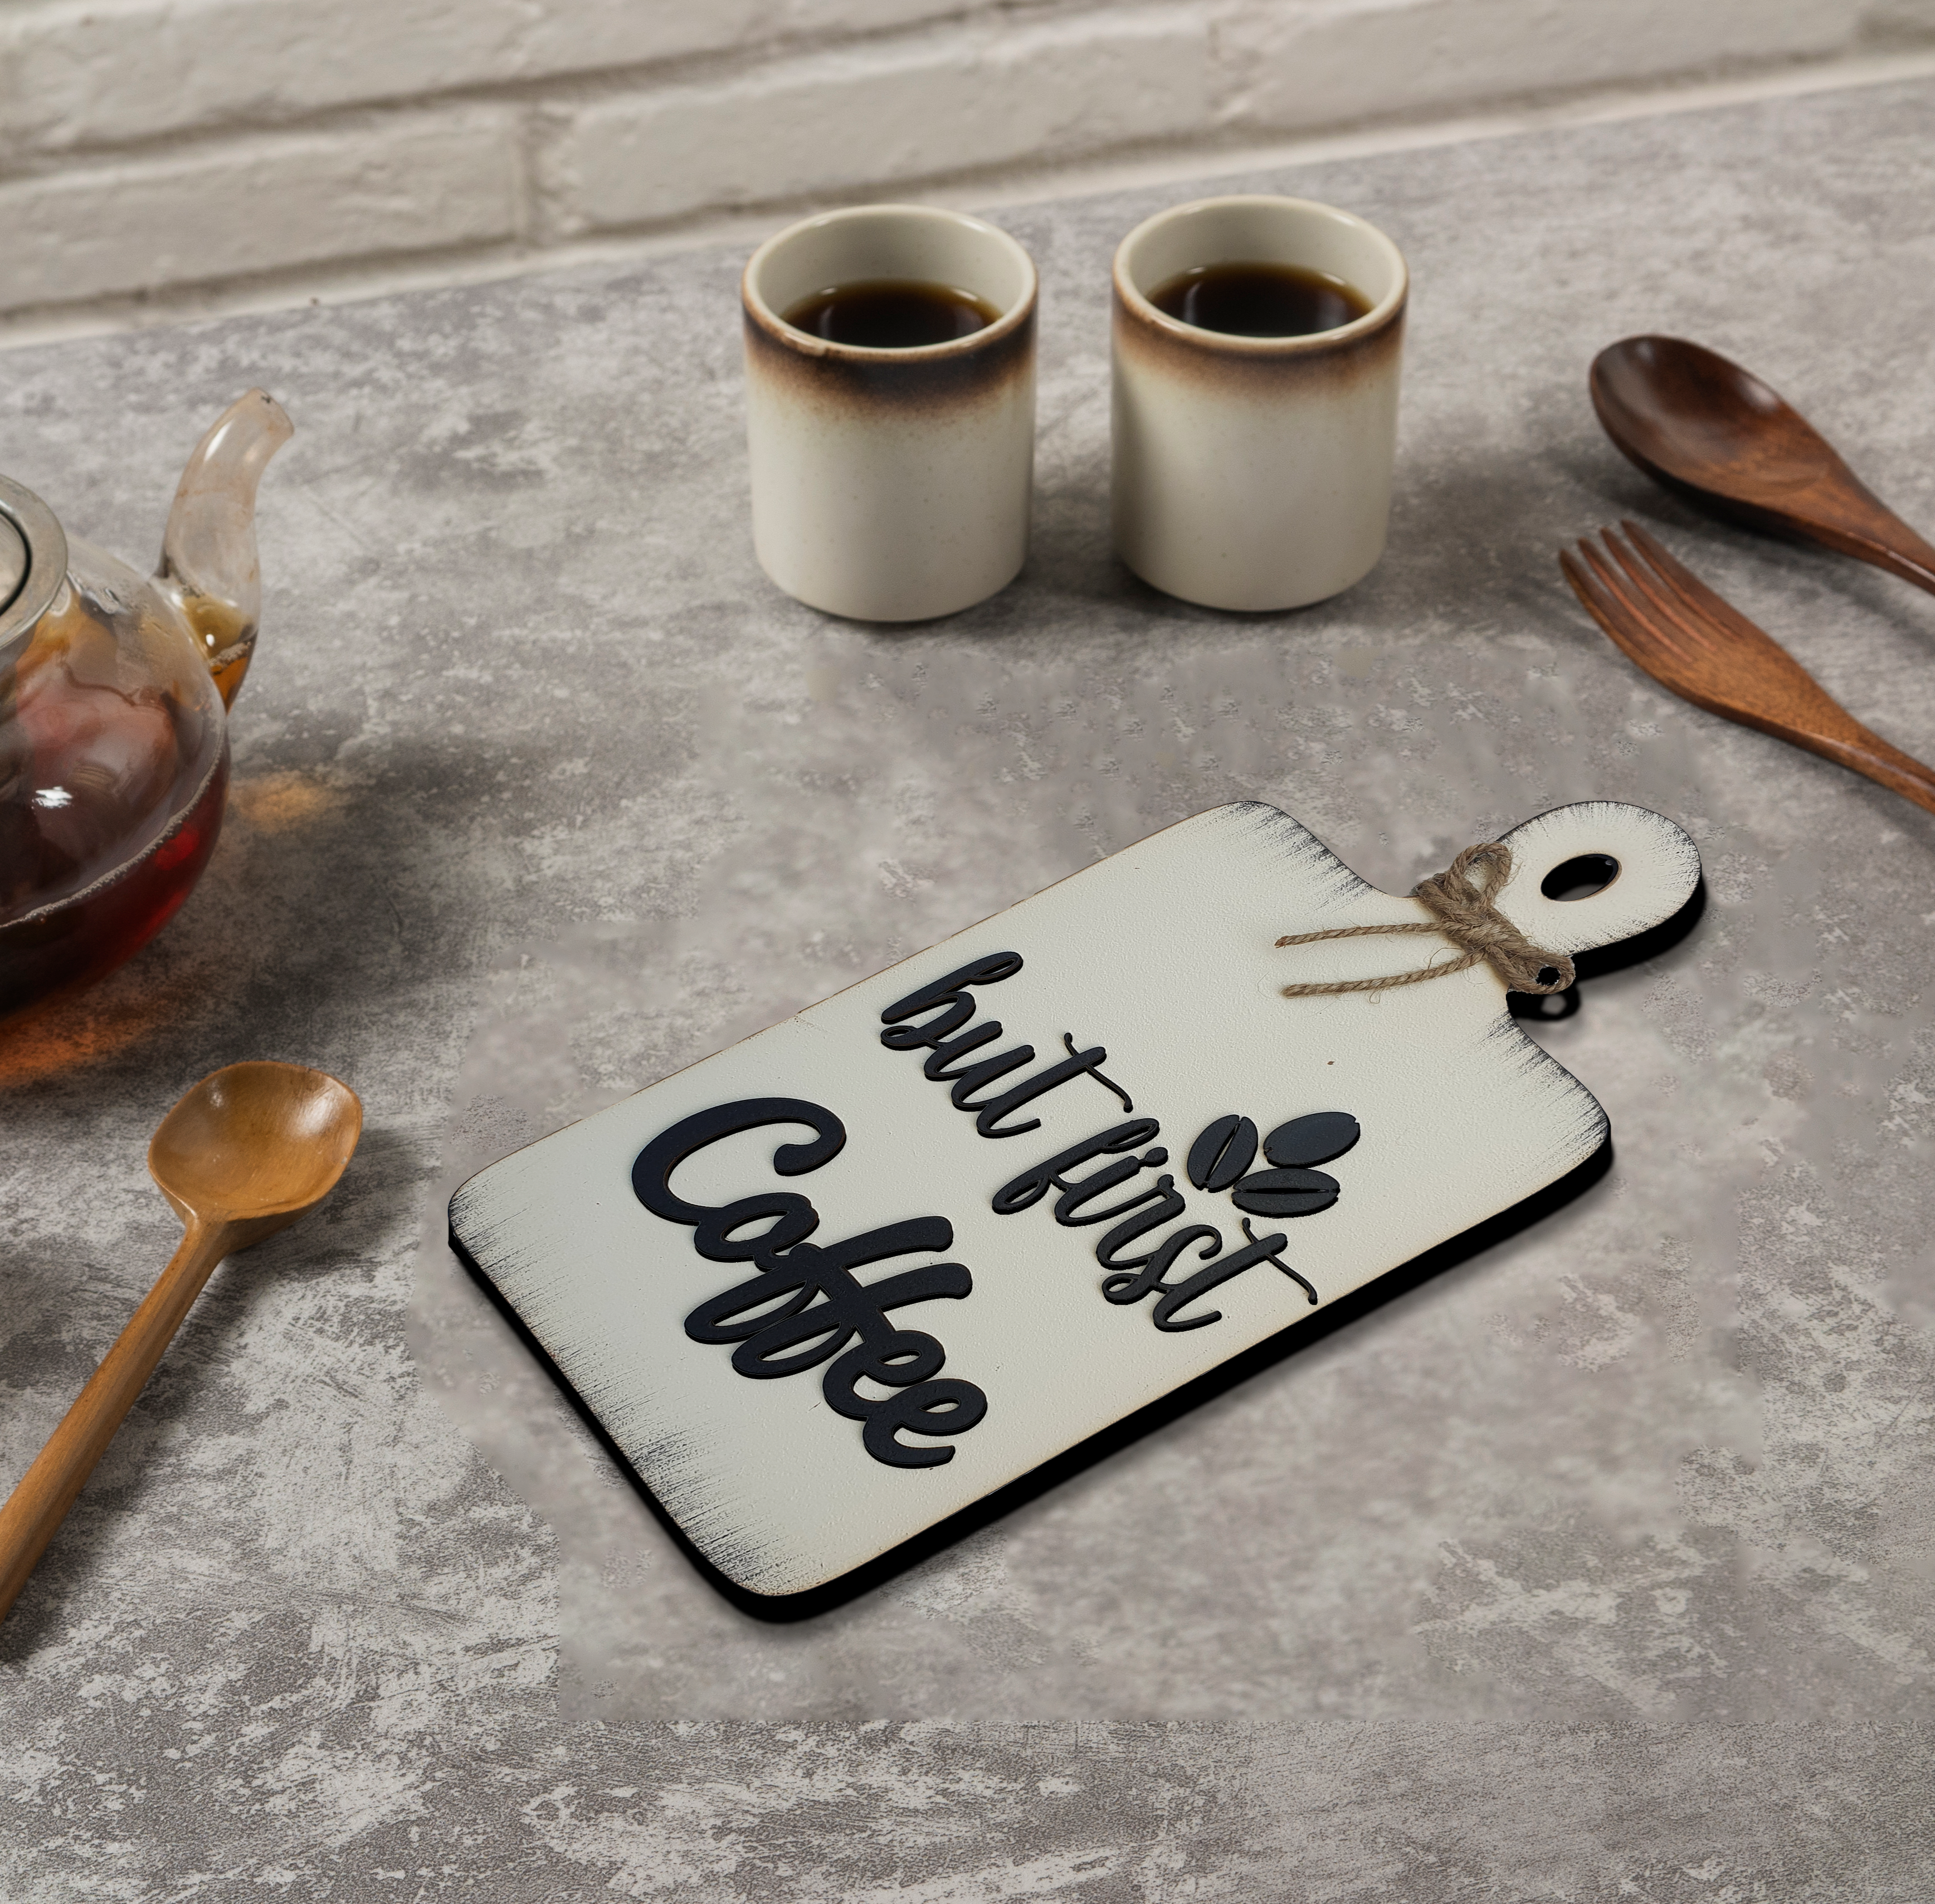 But First Coffee Quote Chop Board Wooden Wall Art for Kitchen, CafÃƒÆ’Ã‚Â©, and Restaurant